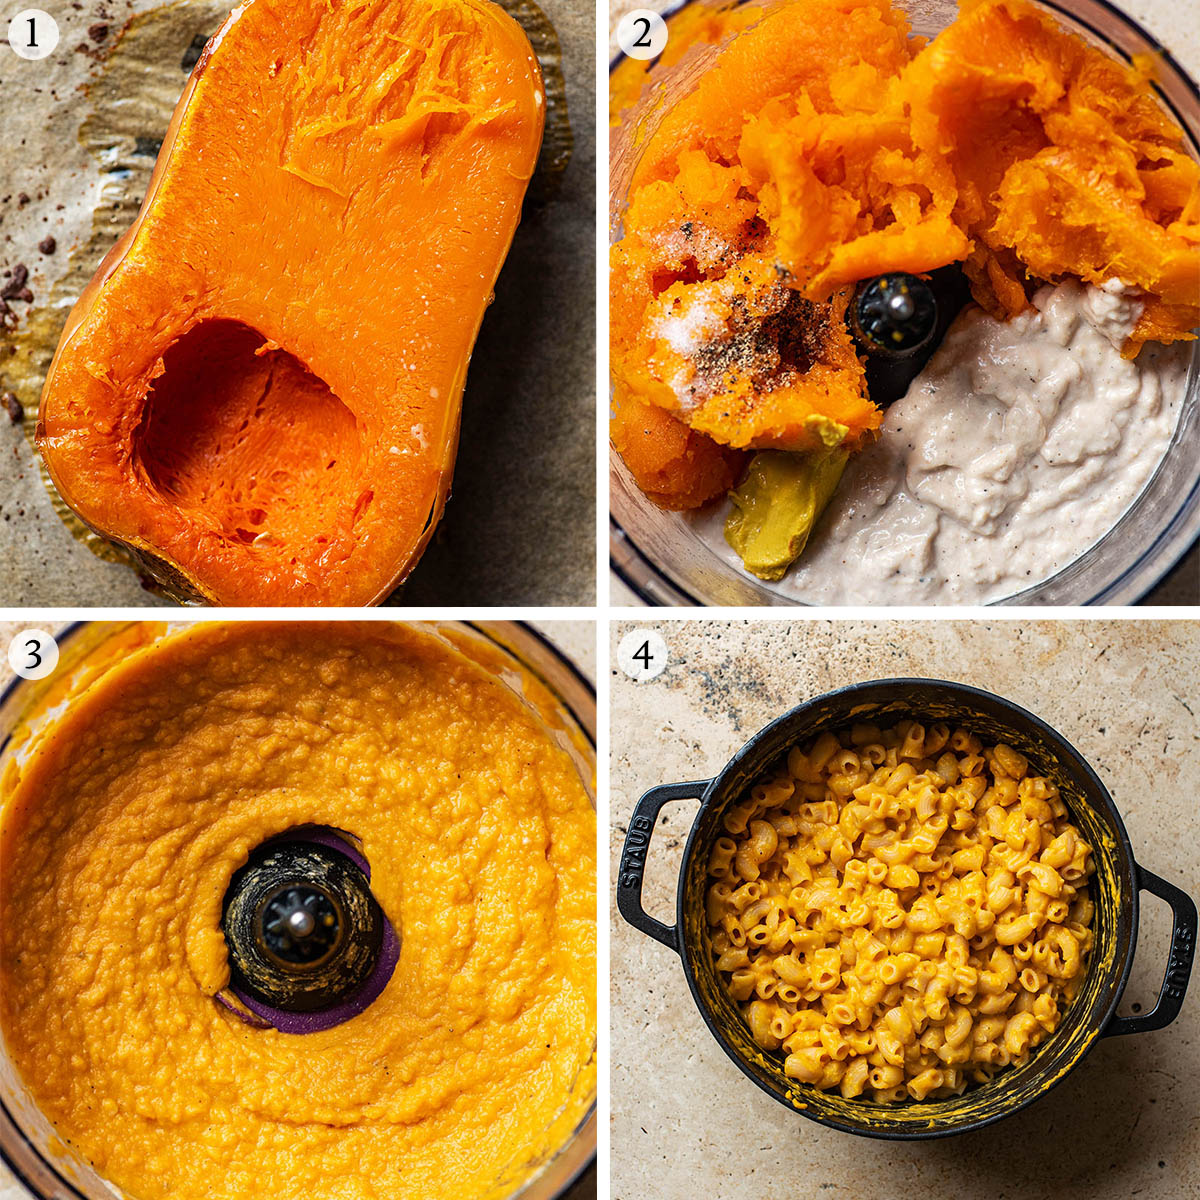 Butternut squash mac and cheese steps 1 to 4.